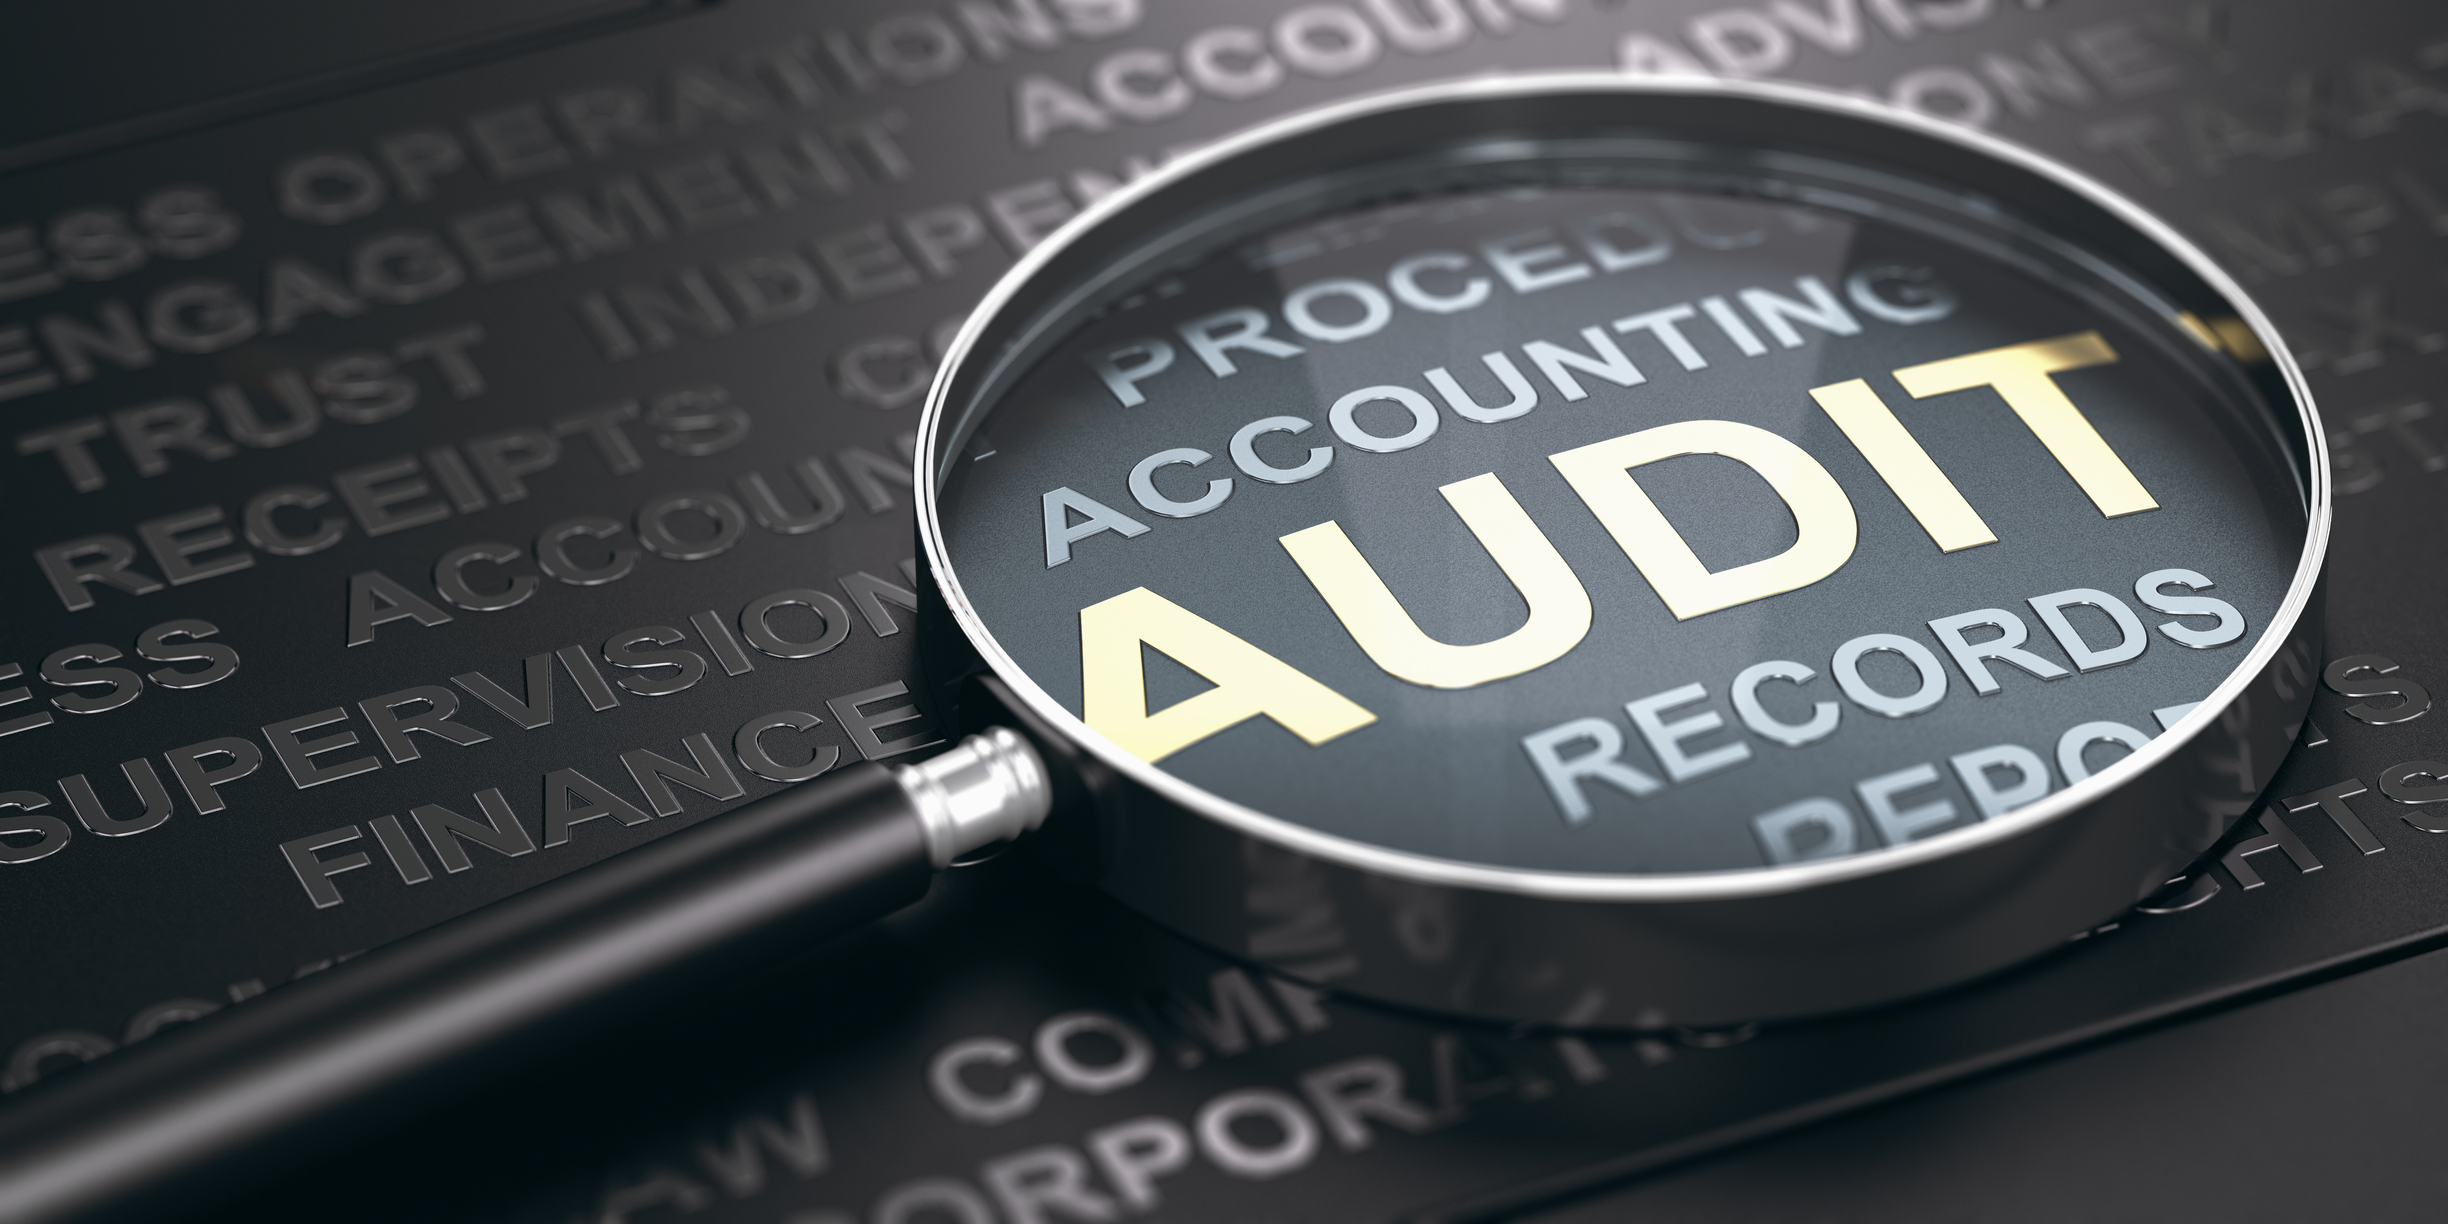 The future of audit